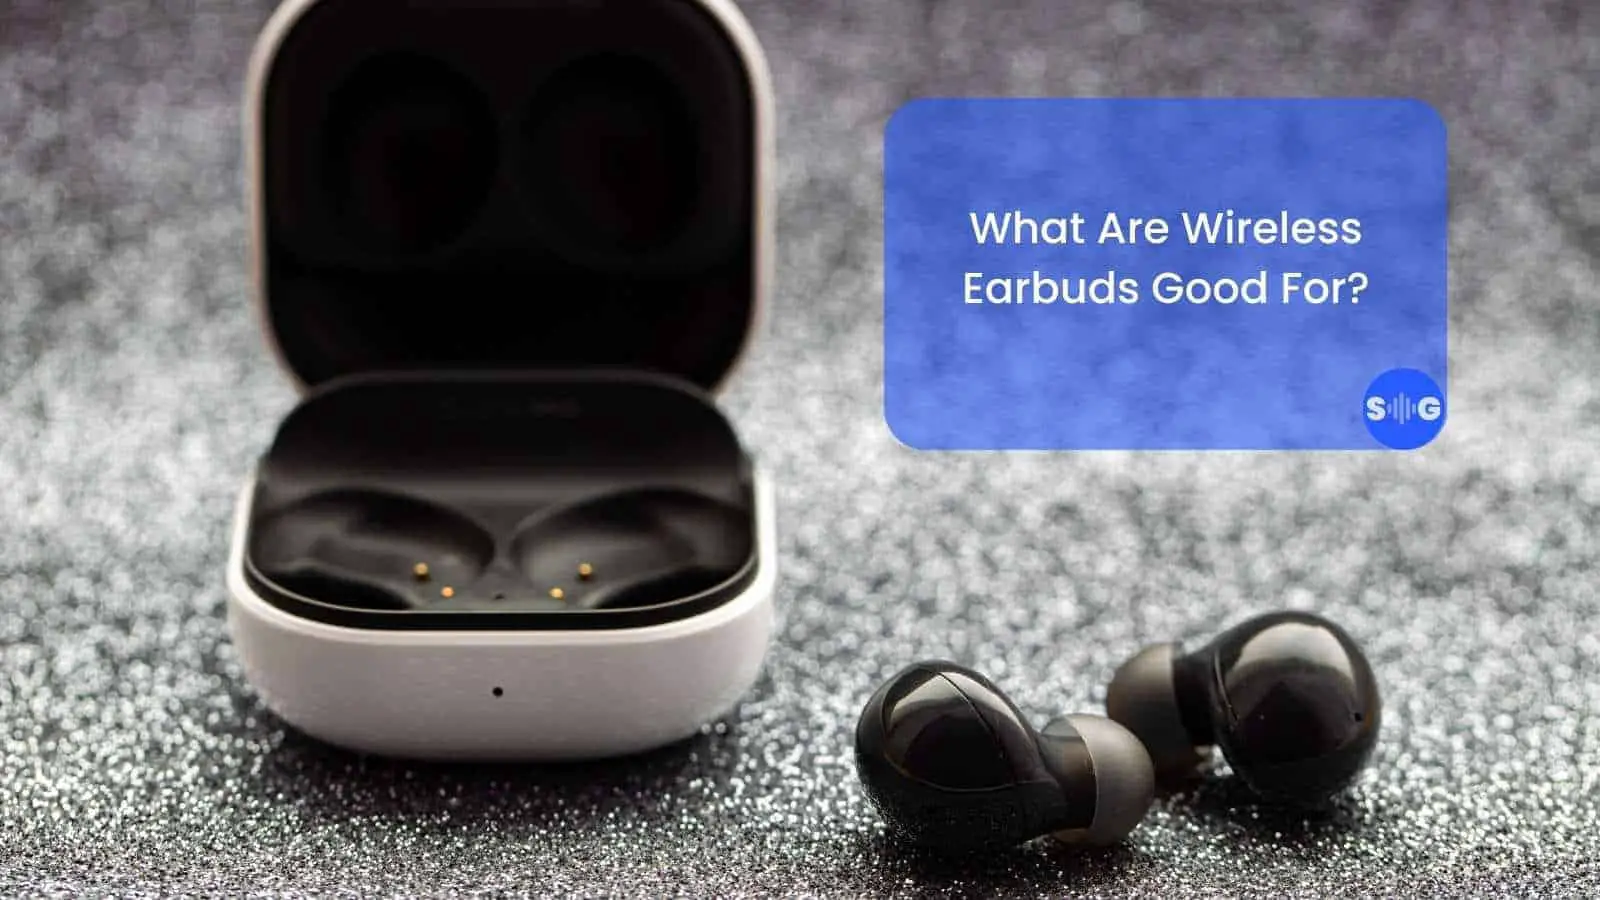 https://soundgulf.com/wp-content/uploads/2023/01/What-Are-Wireless-Earbuds-Good-For.-soundgulf.com_.jpg